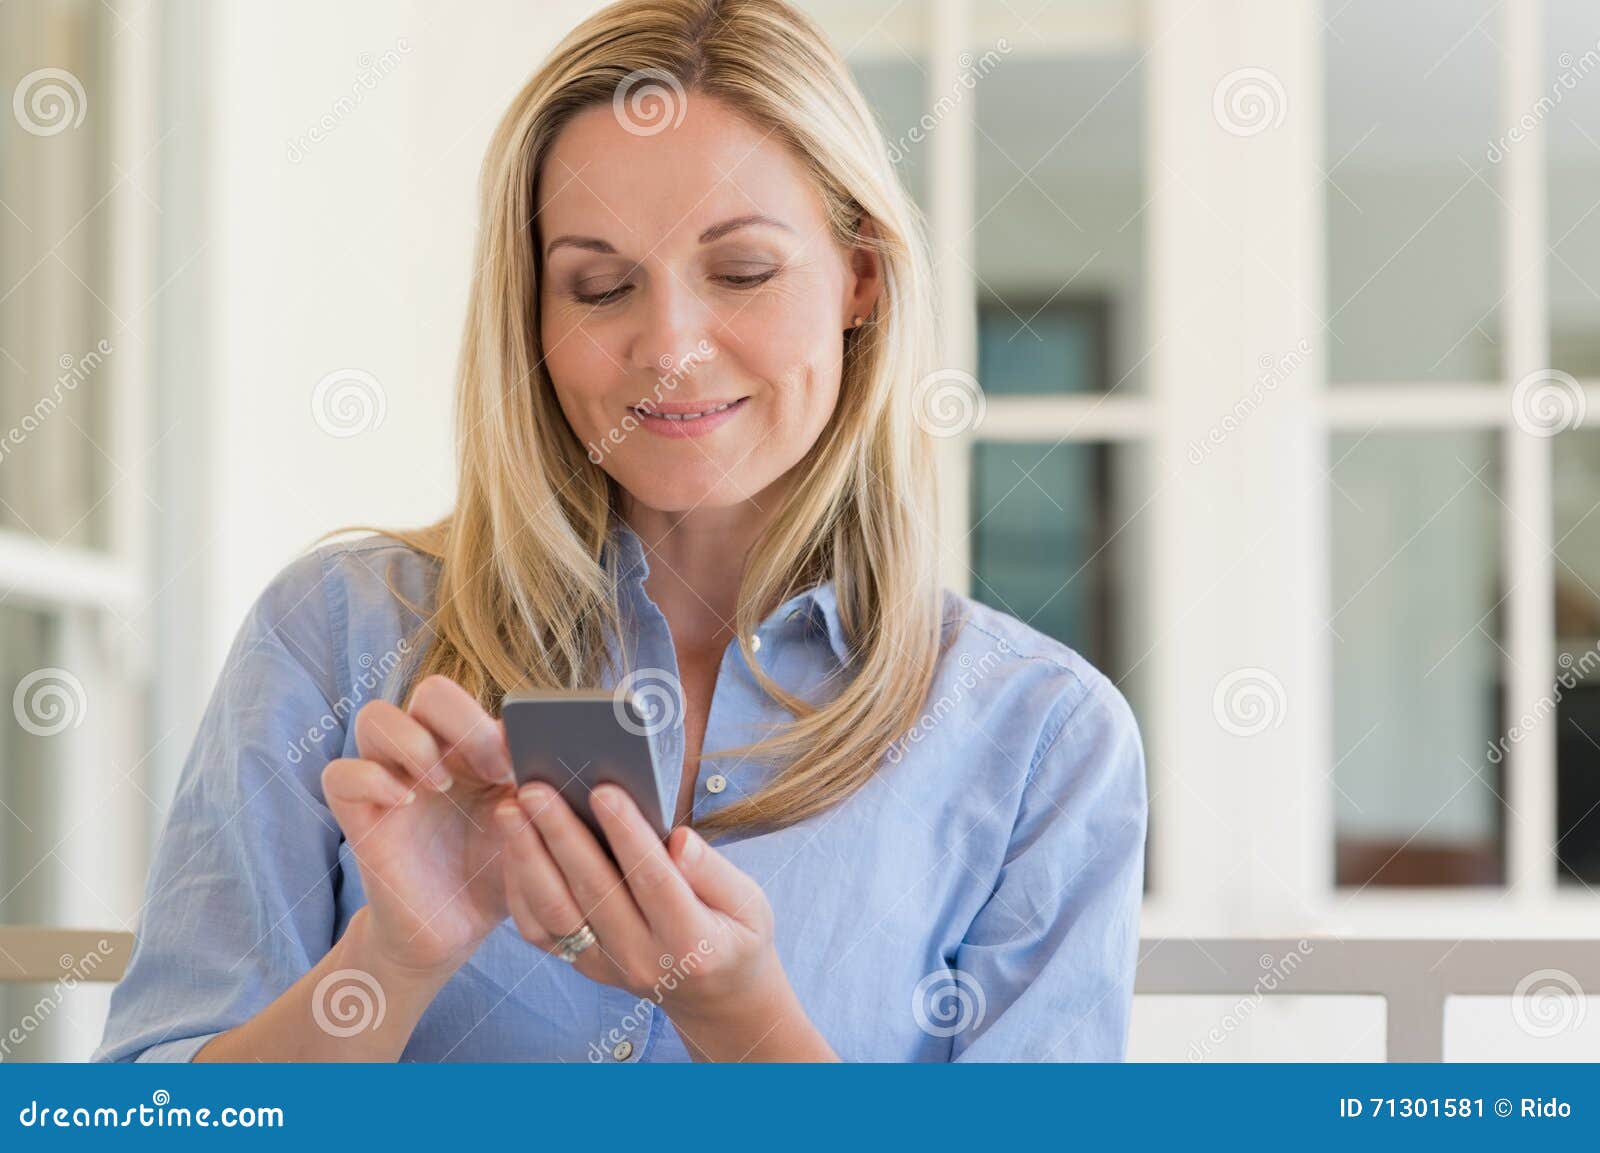 woman texting message